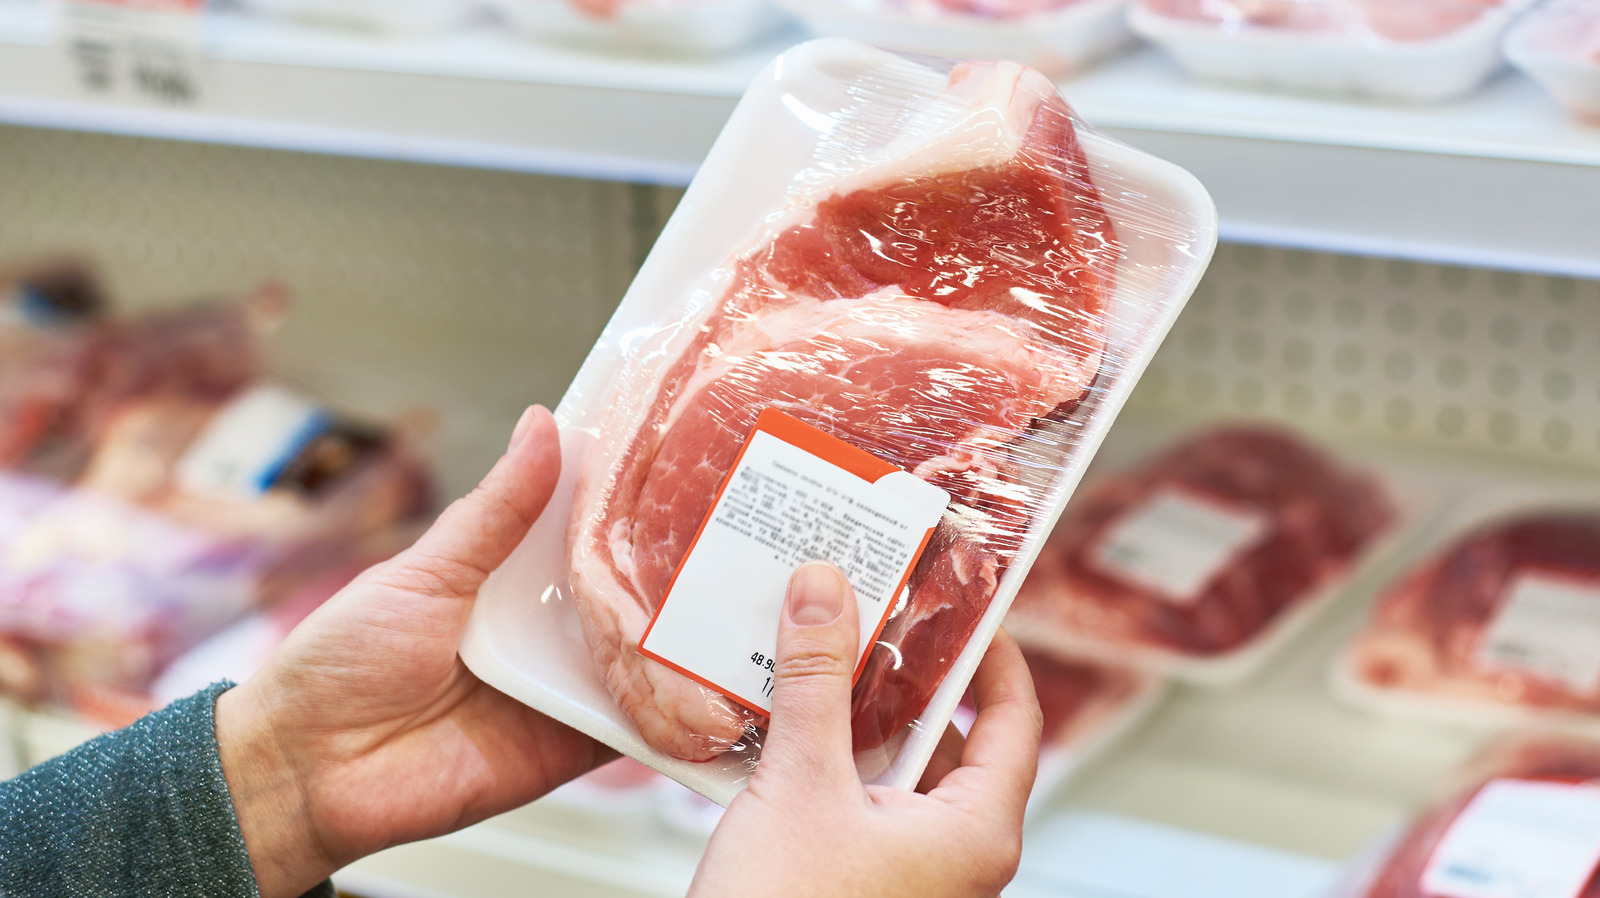 Here's What You Should Know About Buying Meats On Clearance